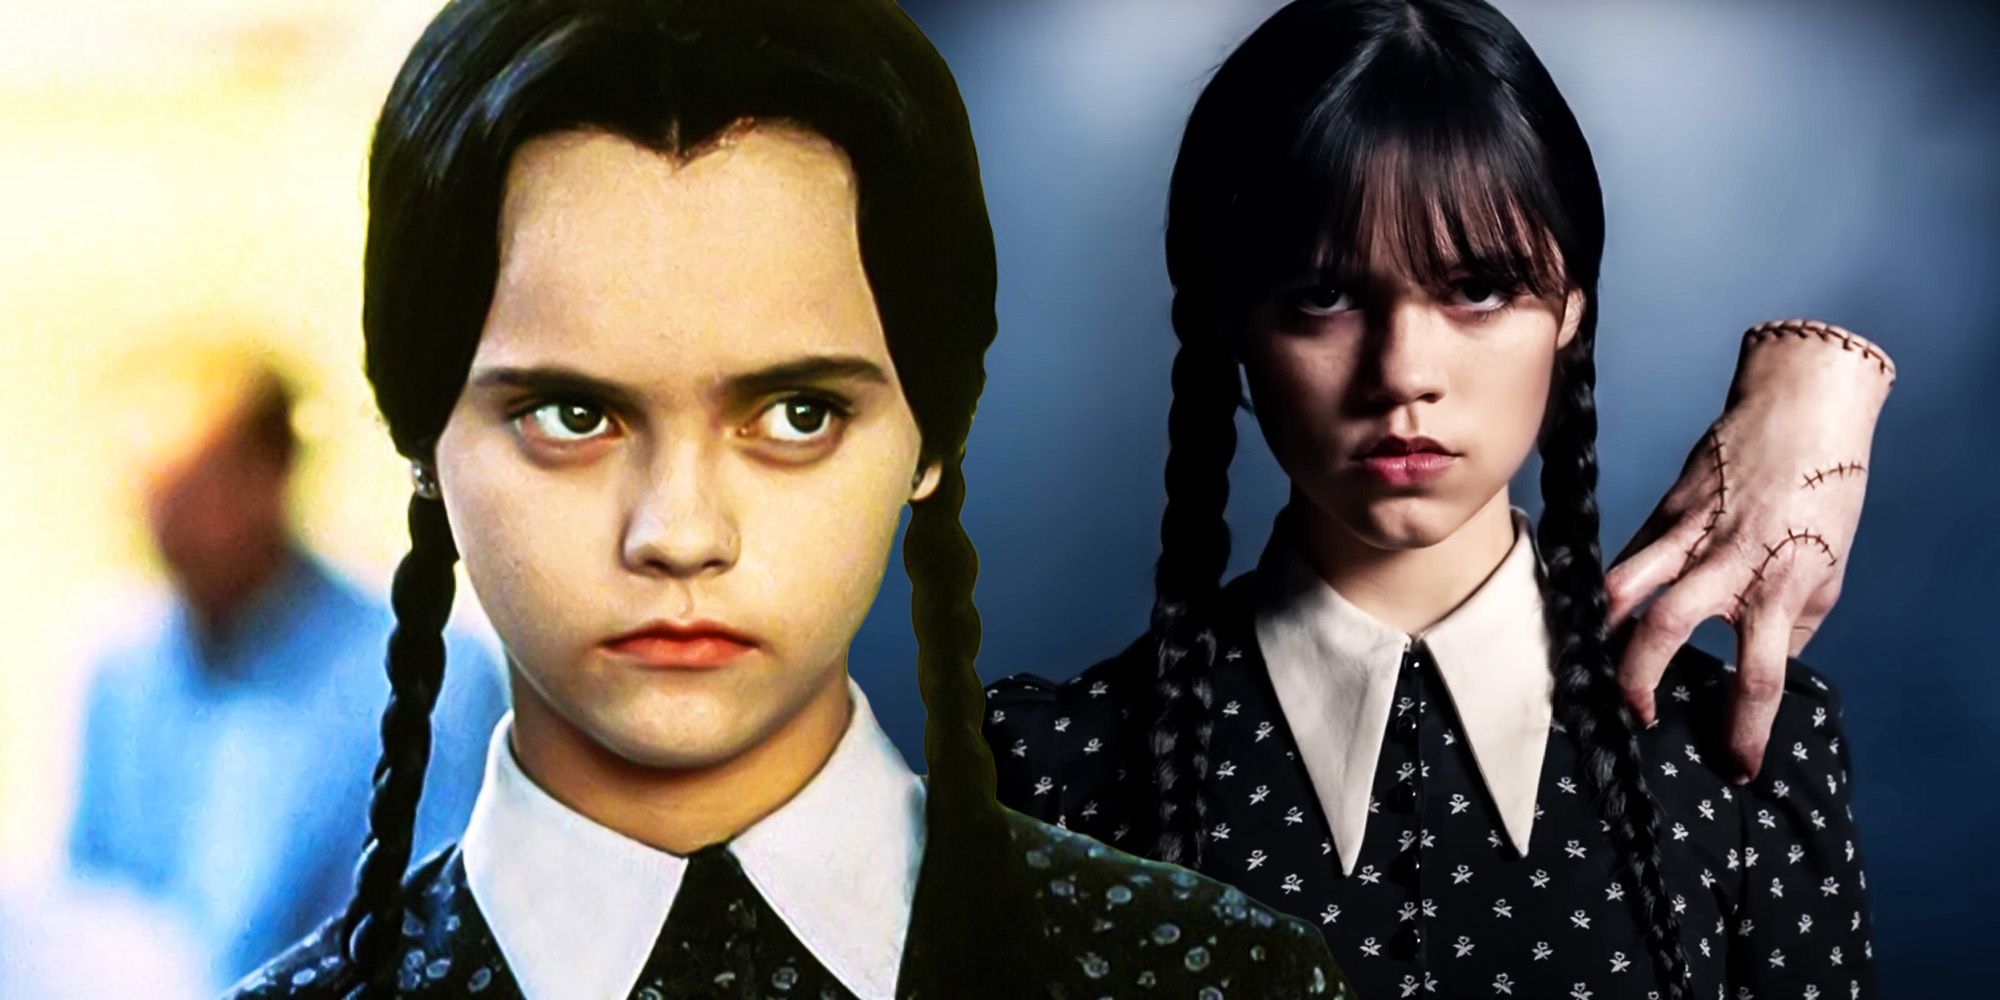 First look at Jenna Ortega as Wednesday Addams: Watch the new teaser!